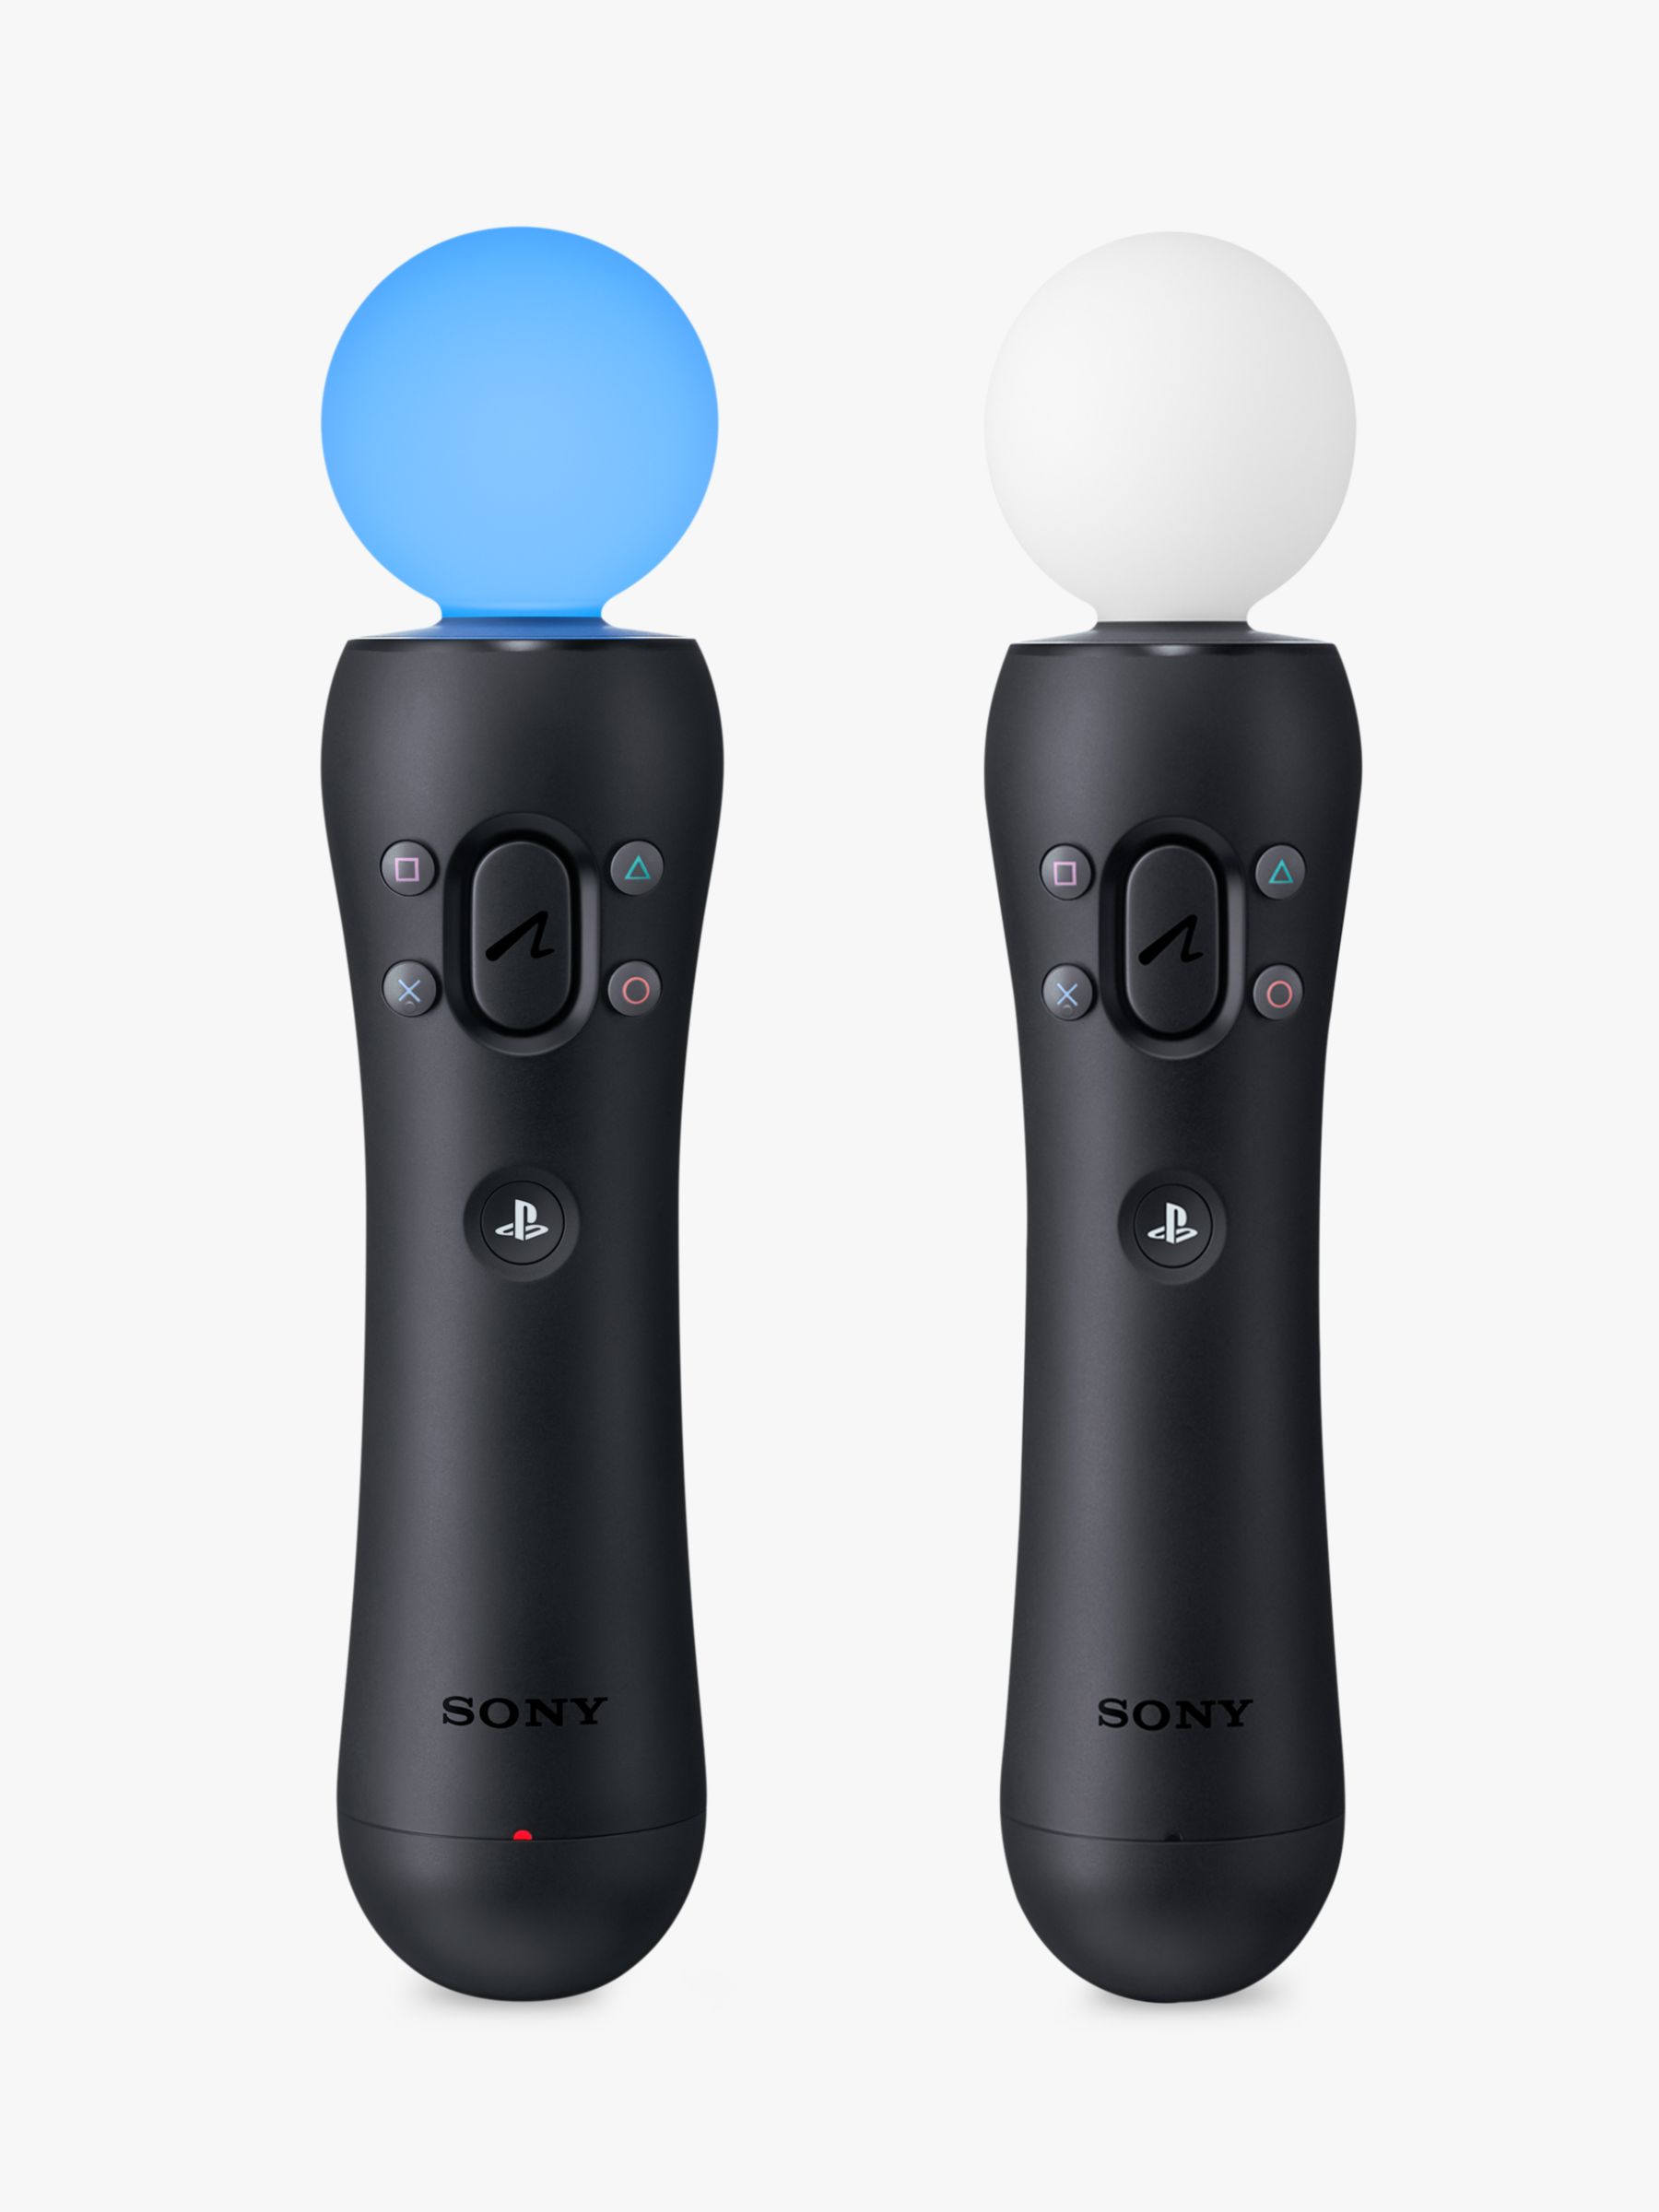 are ps3 move controllers compatible with ps4 vr